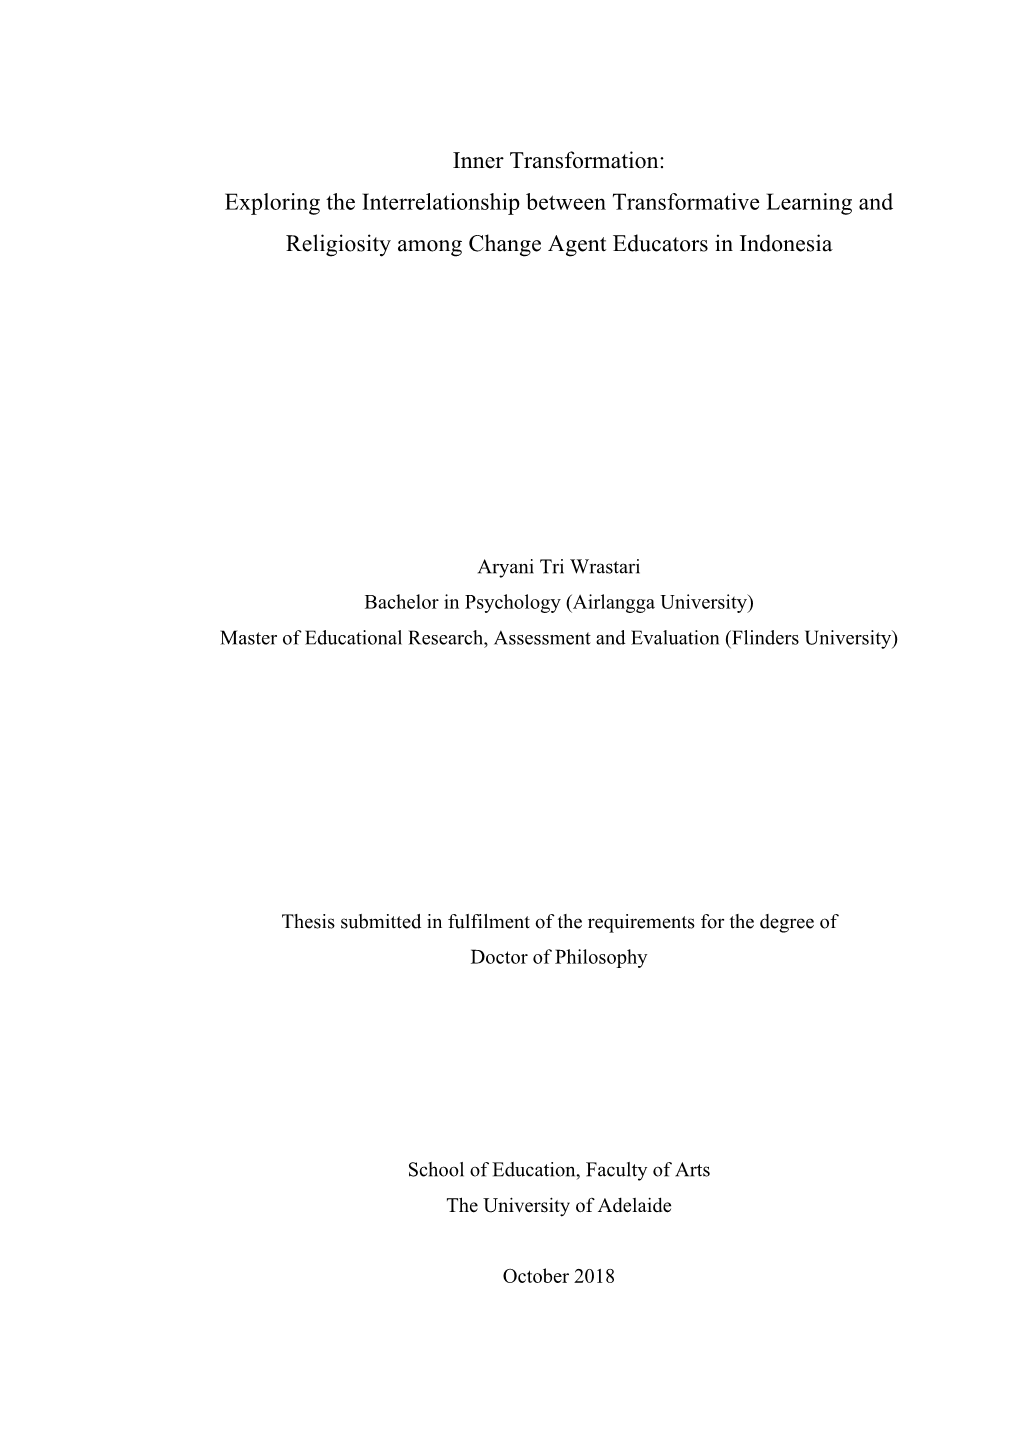 Inner Transformation: Exploring the Interrelationship Between Transformative Learning and Religiosity Among Change Agent Educators in Indonesia